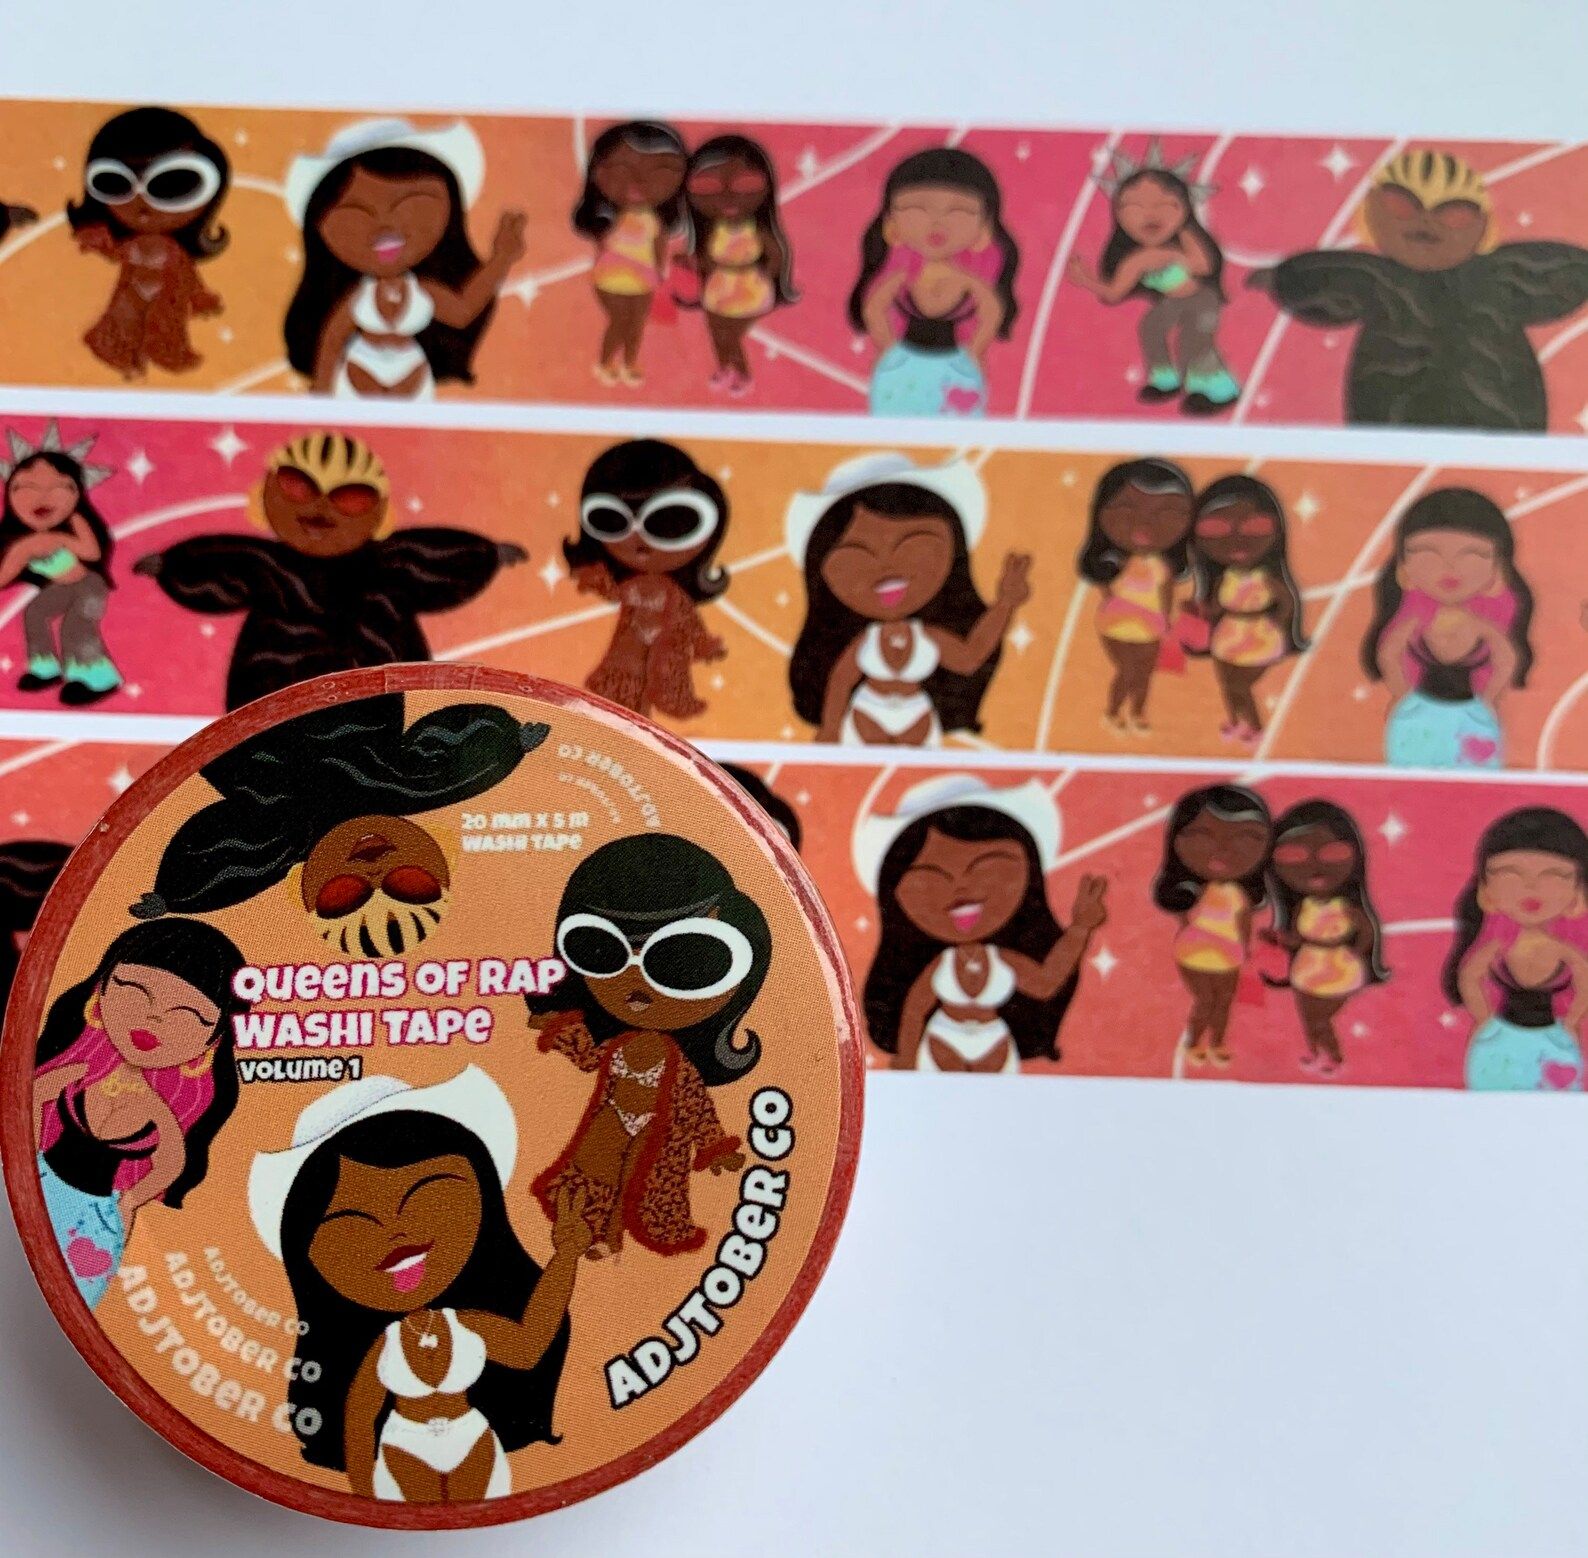 Queens of Rap washi tape featuring illustrations of rap icons